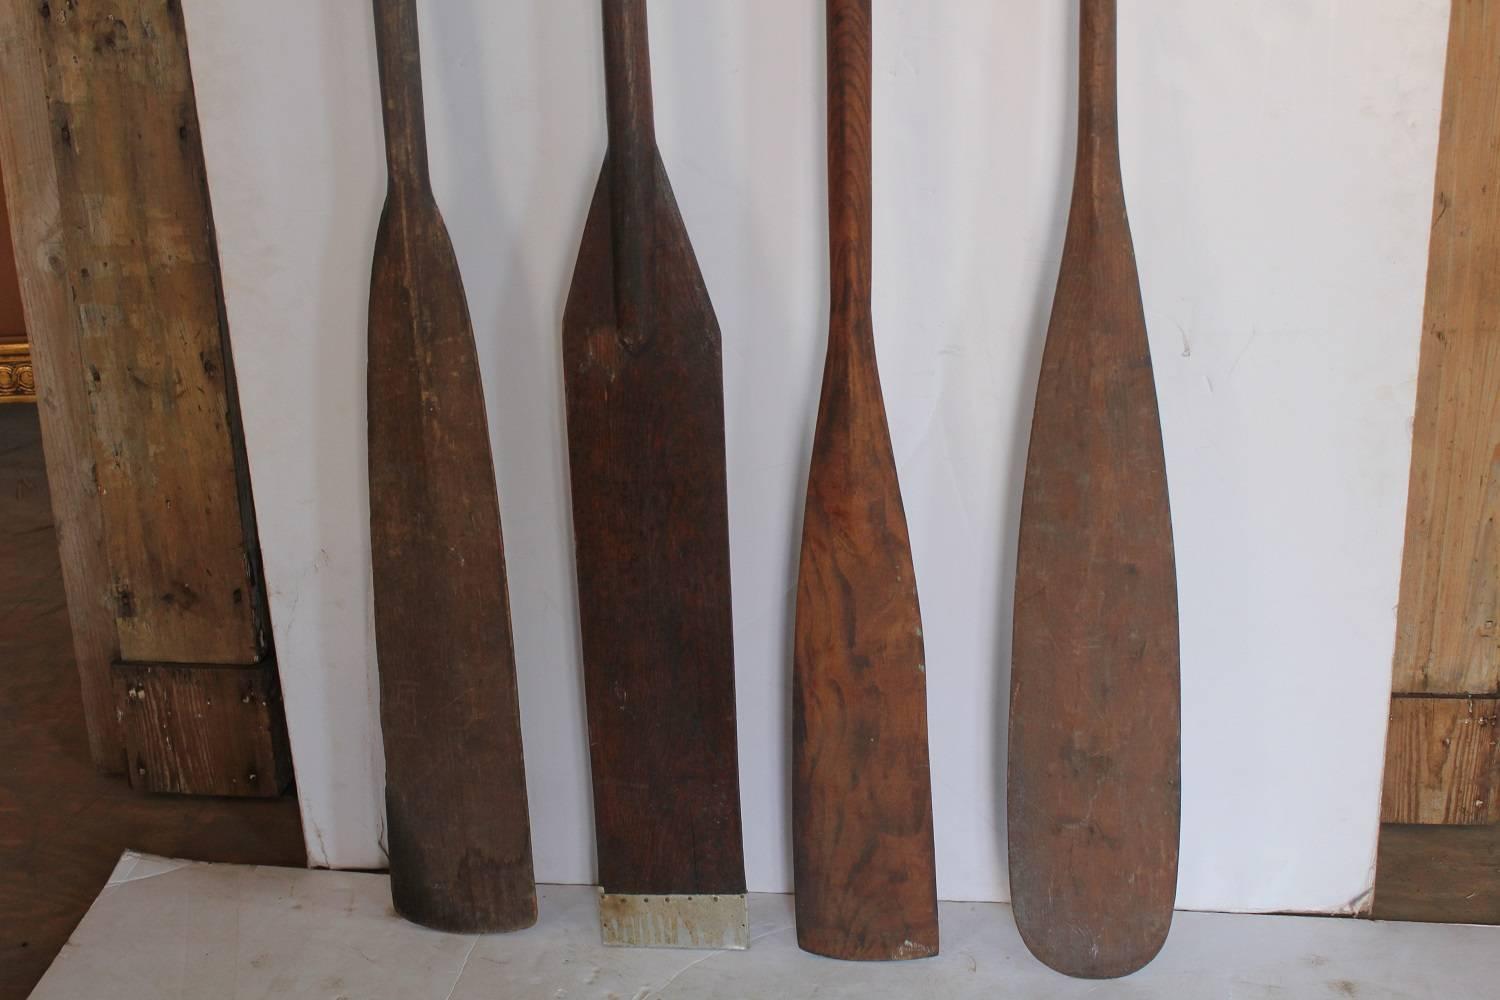 Collection of four antique wooden oars.